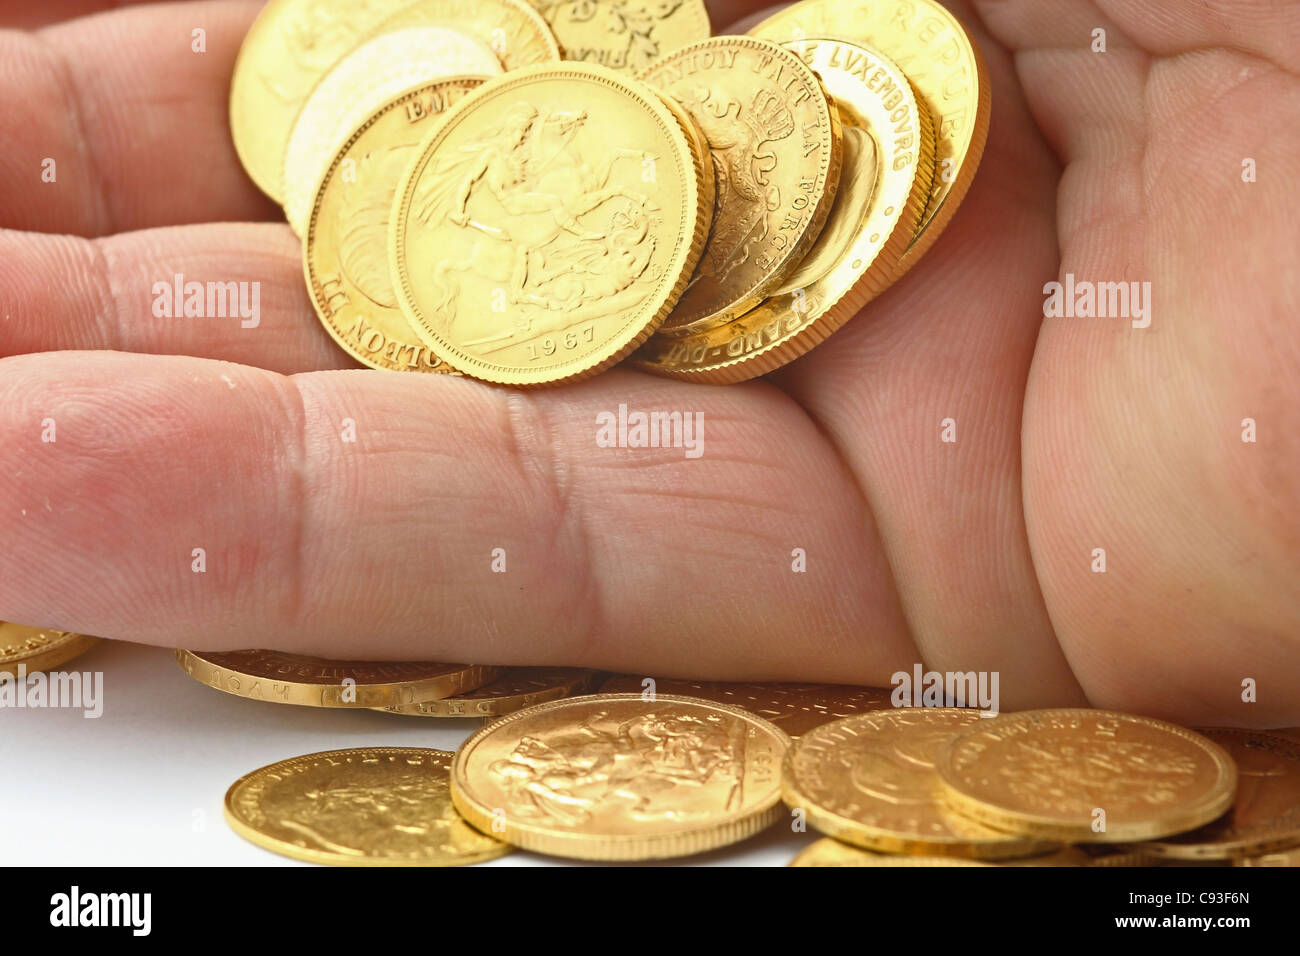 hand with gold coins Stock Photo